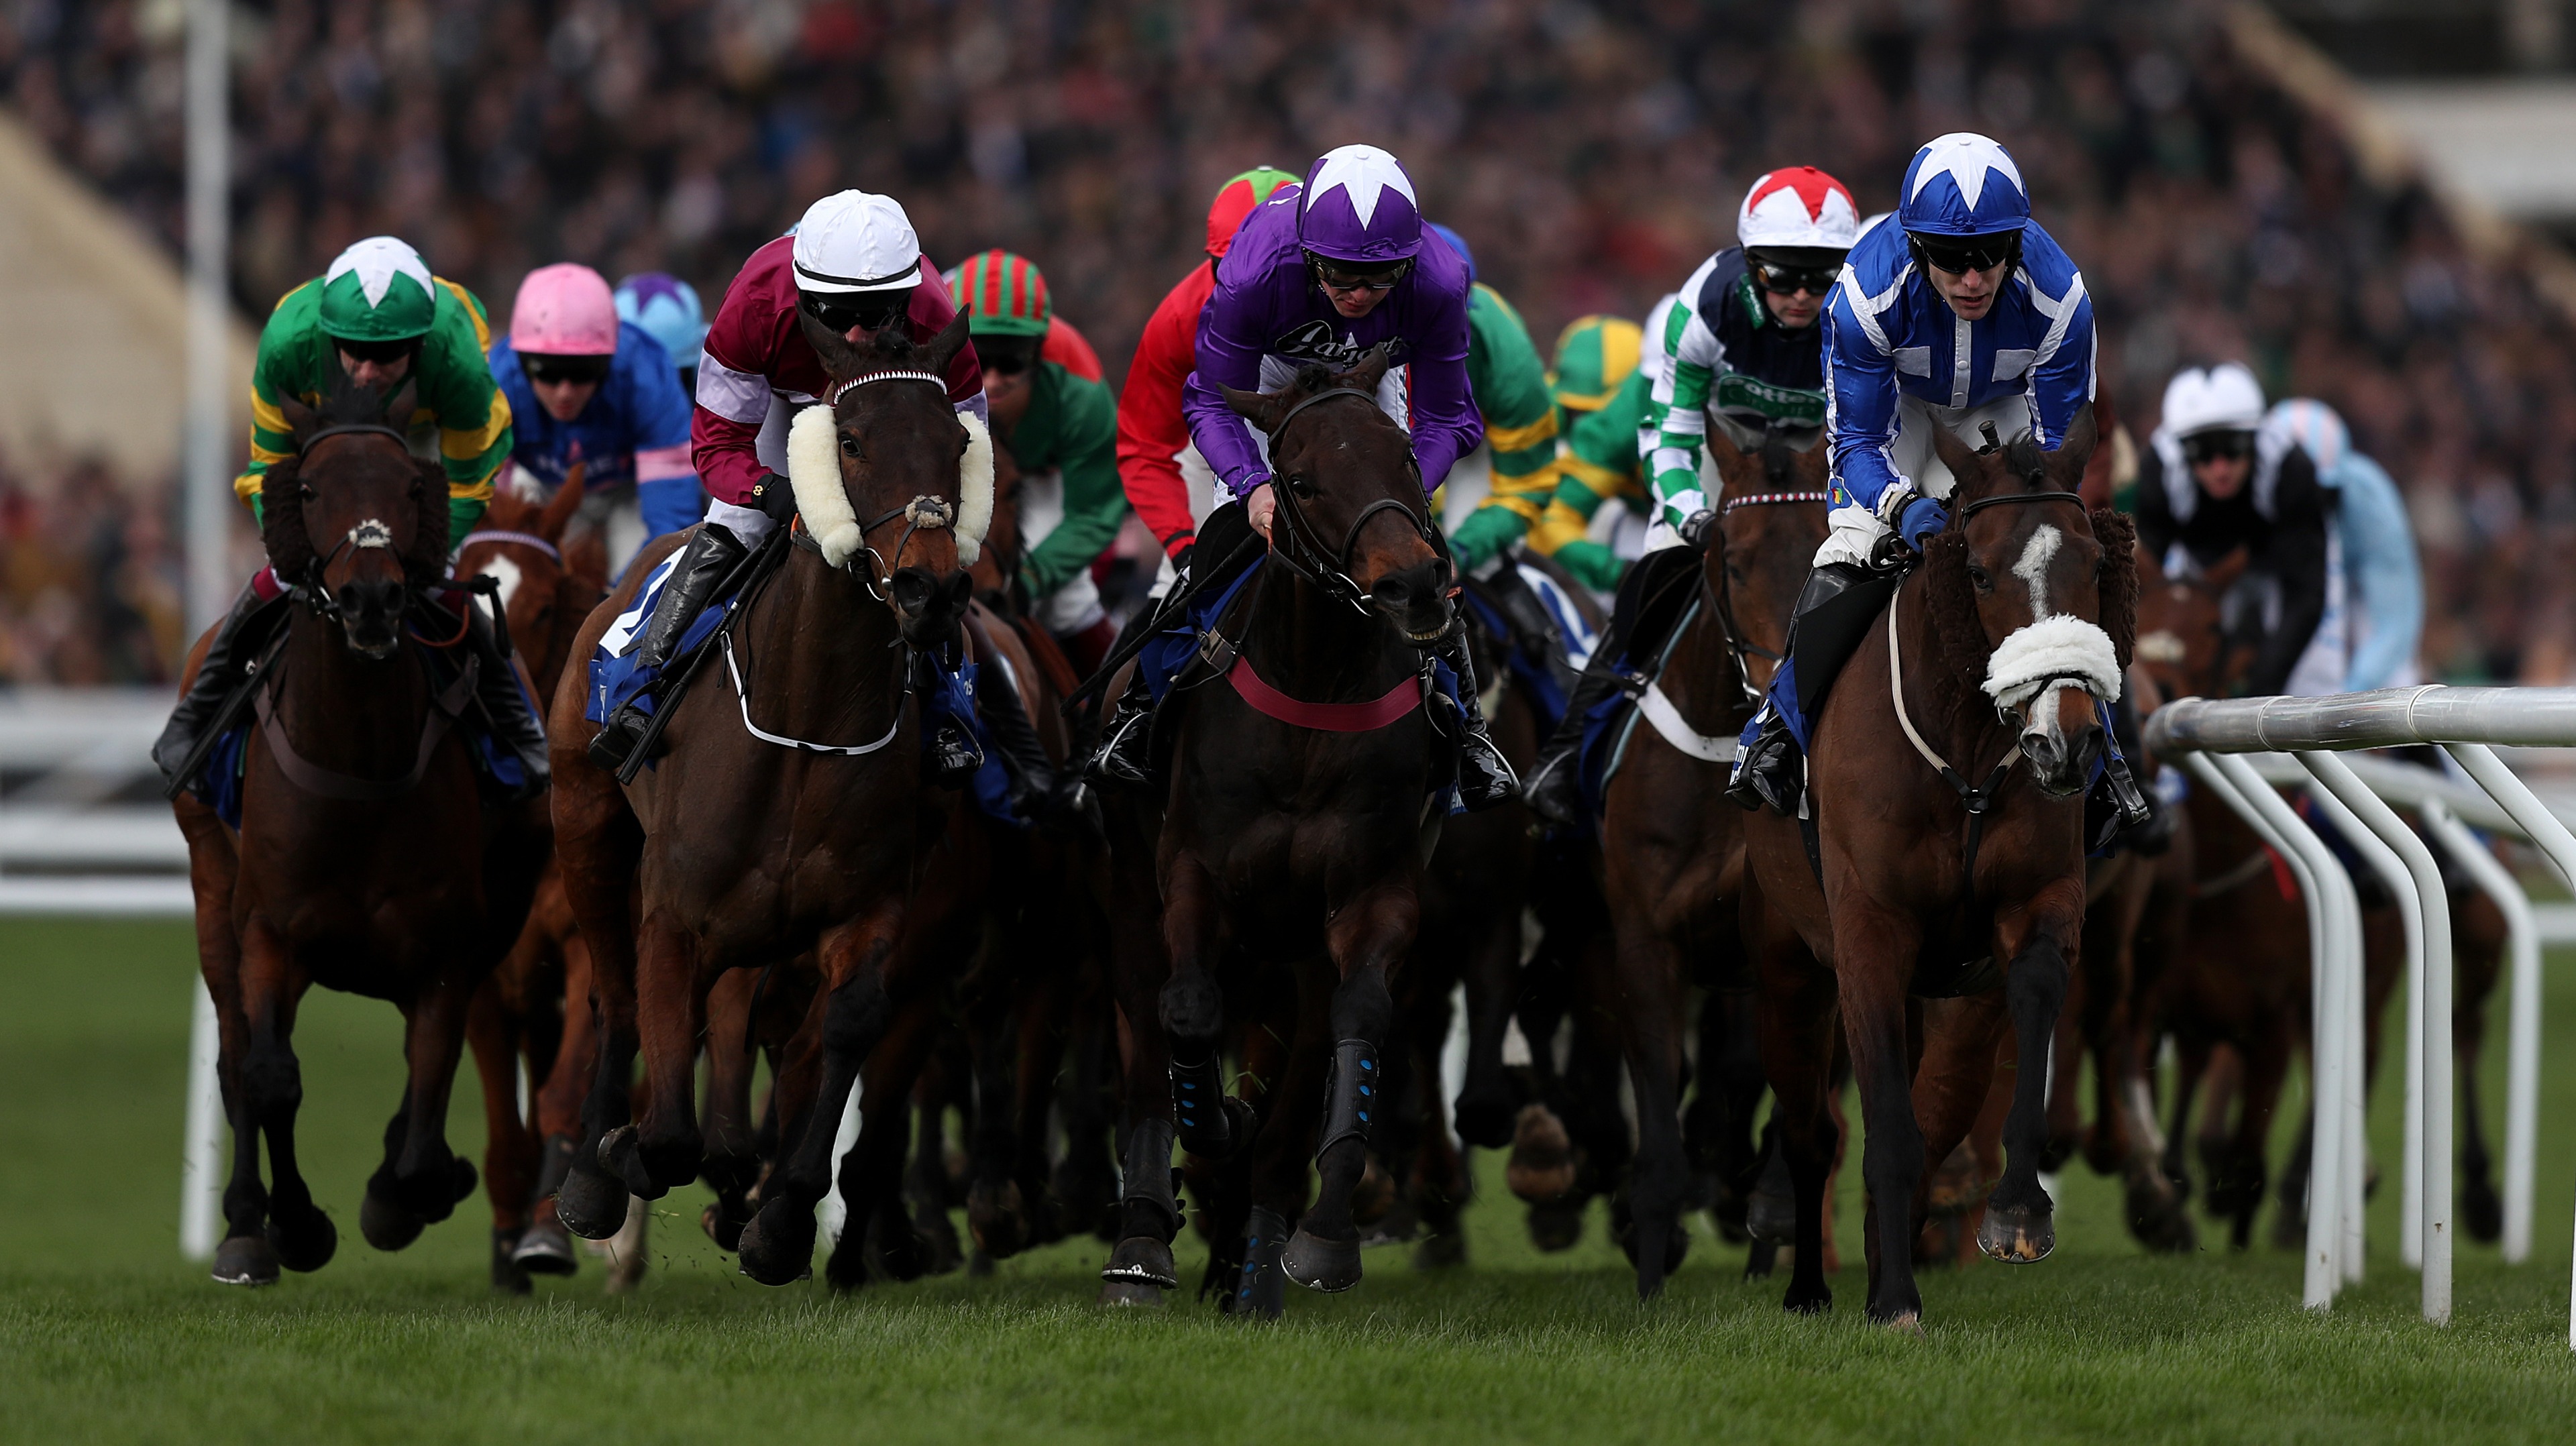 Cheltenham Festival will continue as fourday event for 2023 and beyond